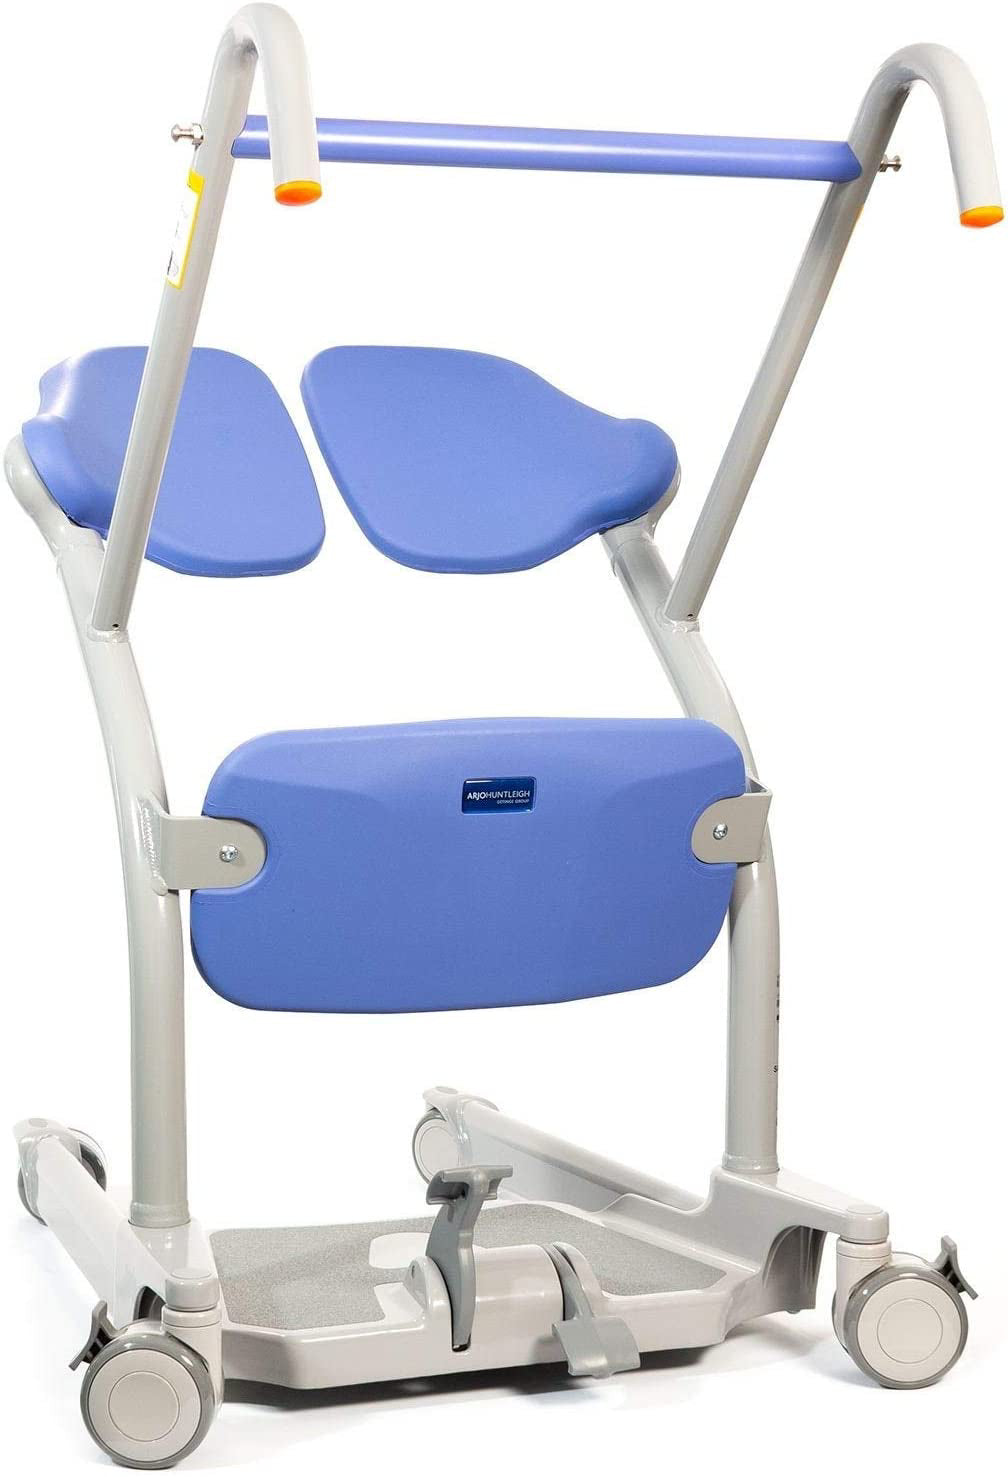 Compact ArjoHuntleigh Sara Stedy Sit to Stand Manual Patient Lift Aid | Holds up to 400 Pounds | Intended for Users 4'6" - 5'8"…